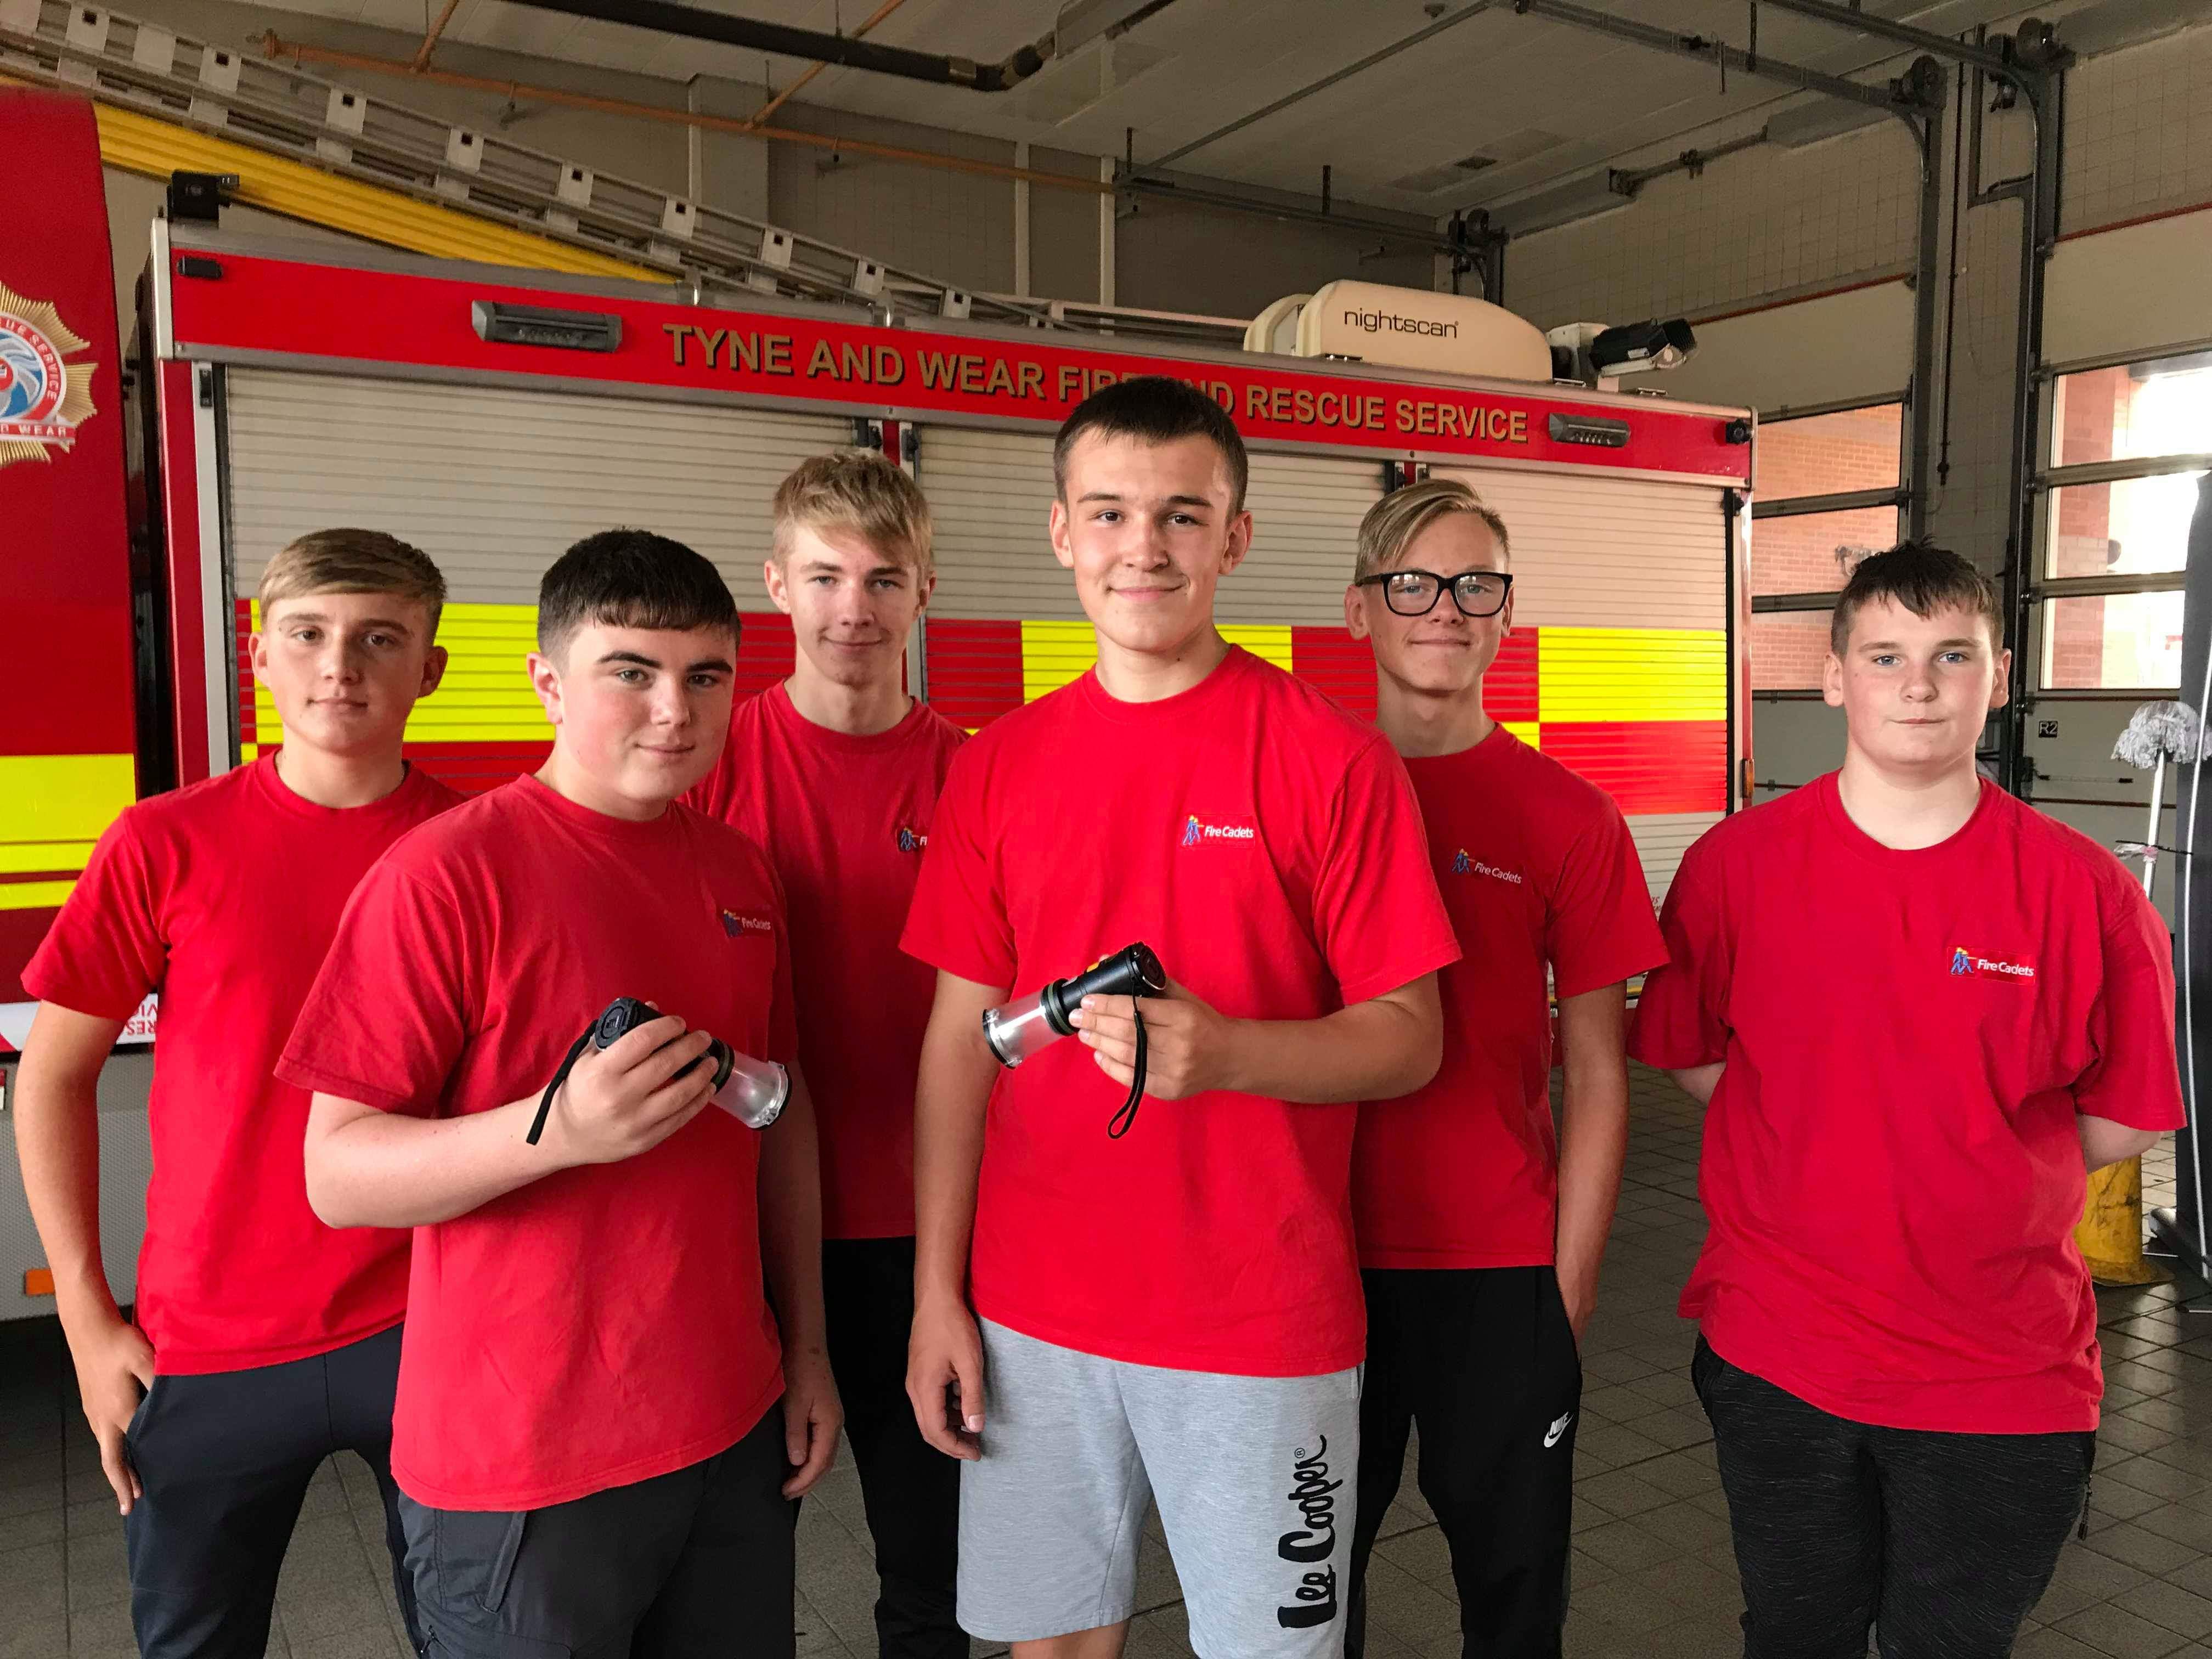 Fire cadets with torches